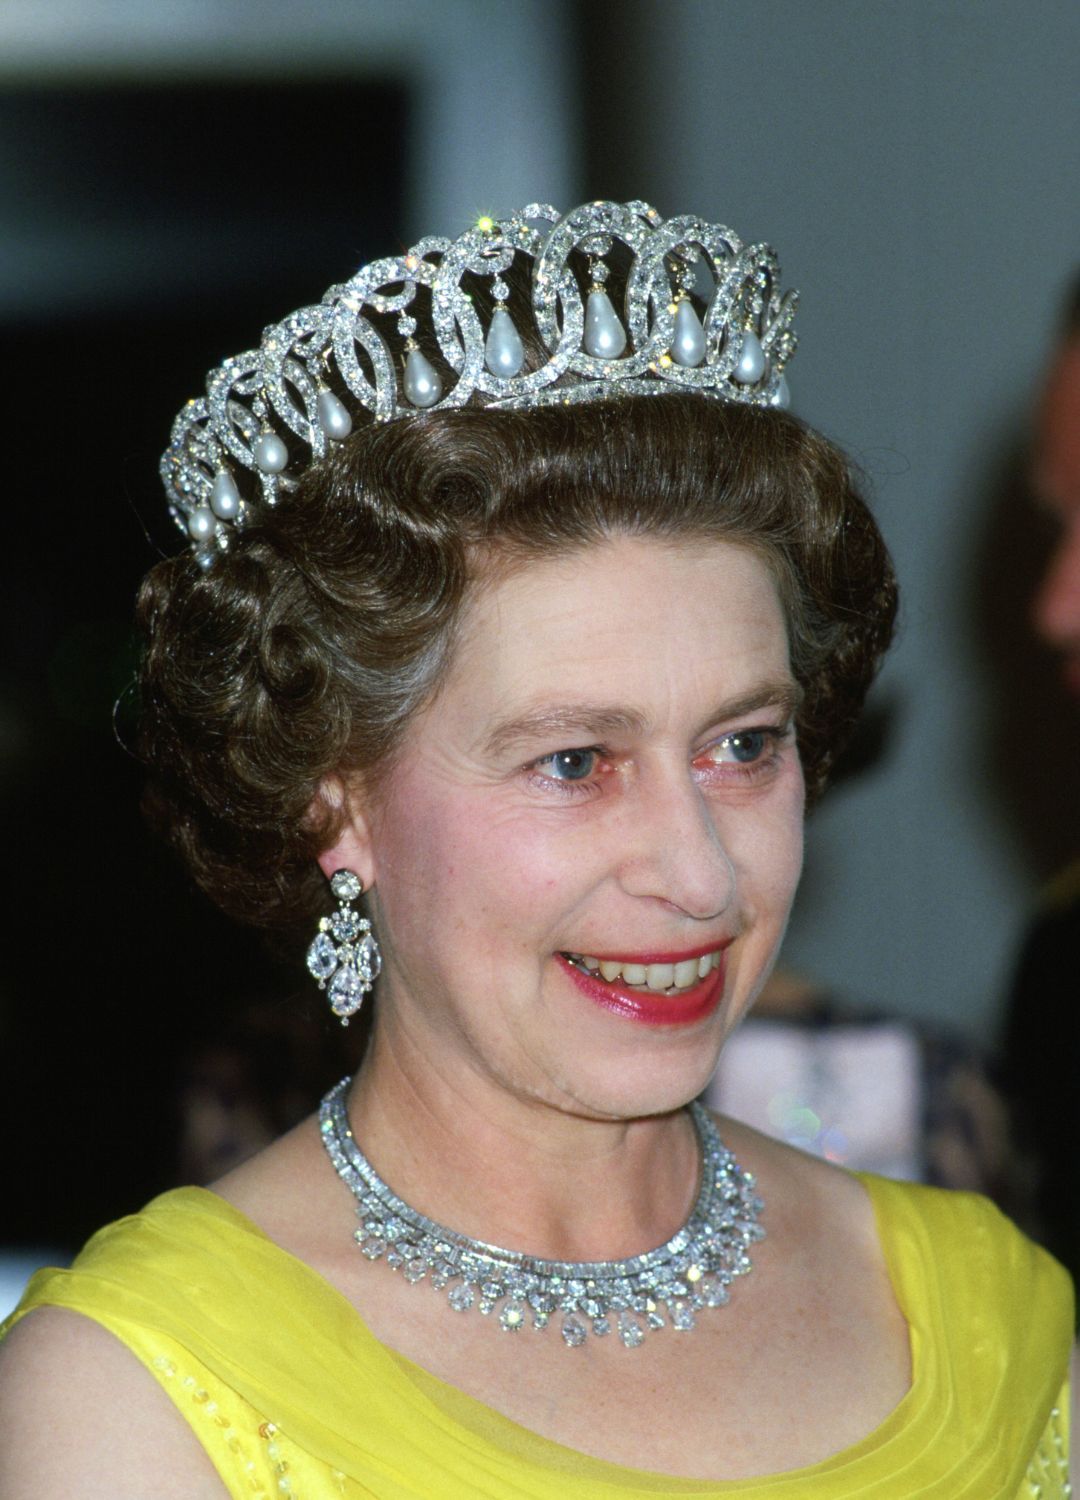 <p>                     This ornate tiara has had many lives and owners. It was first bought by Queen Mary from Grand Duchess Elena Vladimirovna of Russia in 1921 and was originally made with 15 large drop pearls. However, when Queen Mary purchased the tiara she had it altered so that it could also accommodate 15 emeralds. Interestingly, the tiara can now be worn either way with both pearls and emeralds.                   </p>